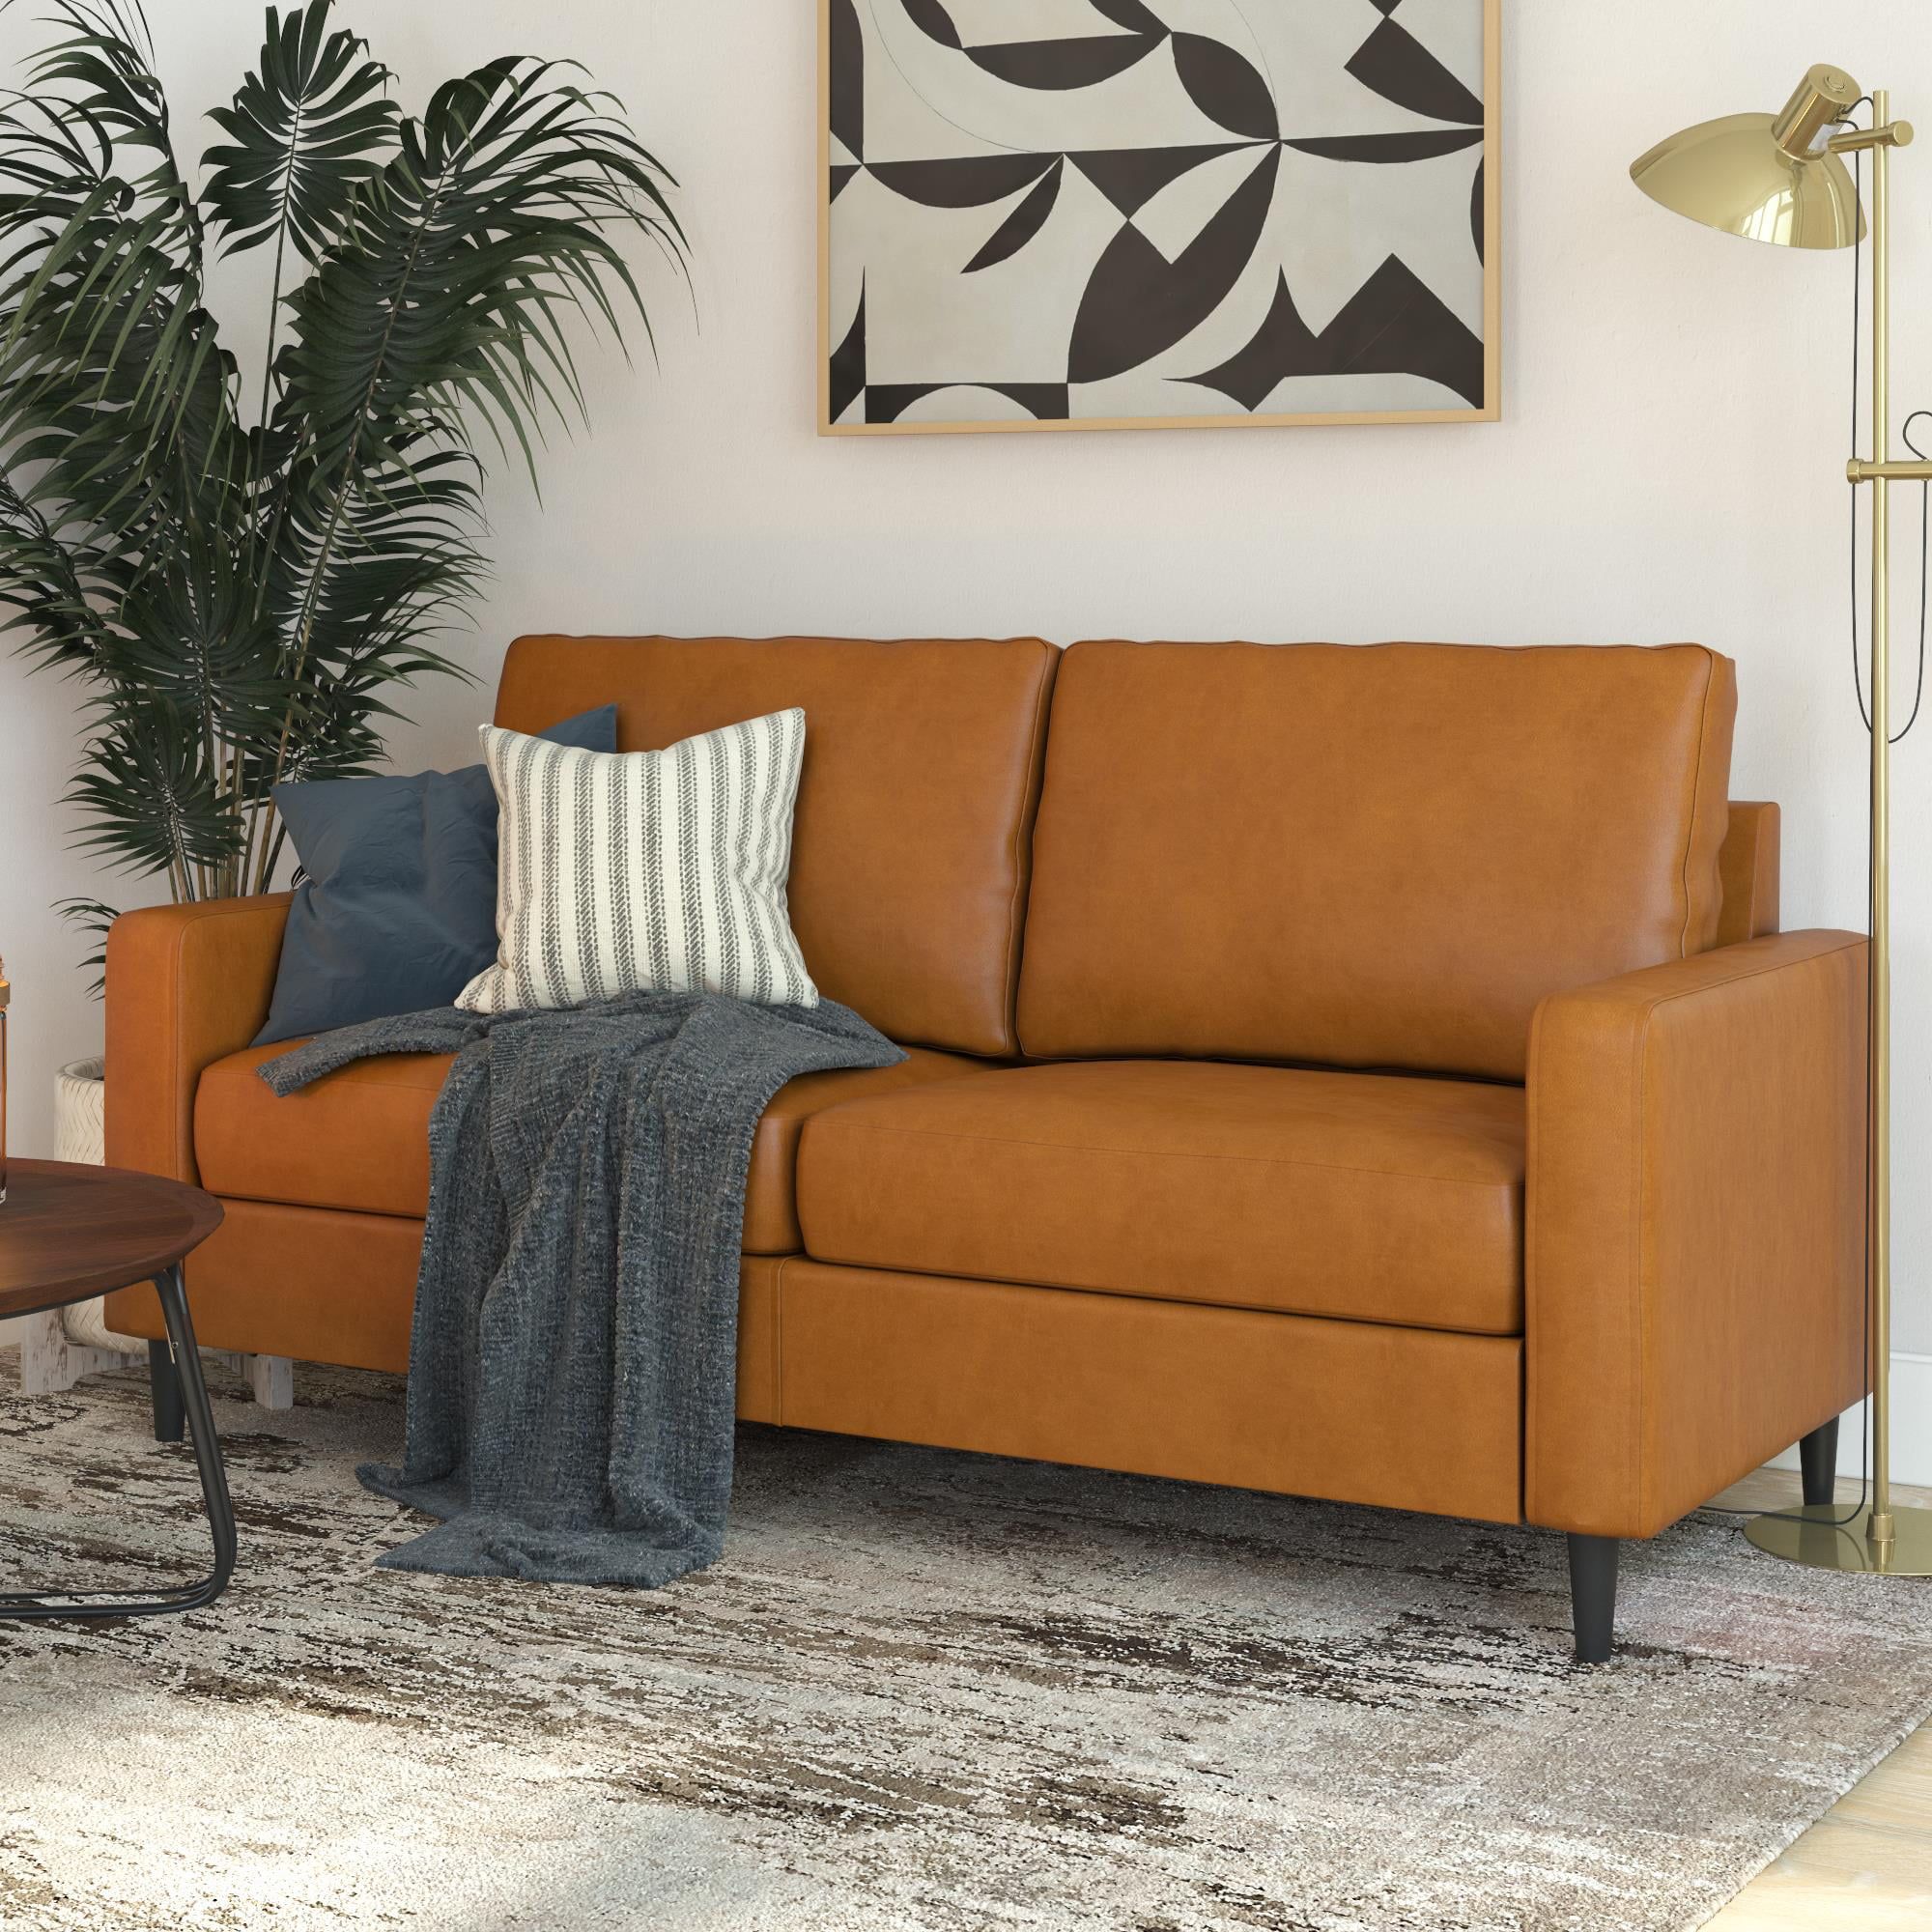 Dhp Connor Modern Sofa, Small Space Living Room Furniture, Camel Faux With Sofas For Small Spaces (Gallery 7 of 20)